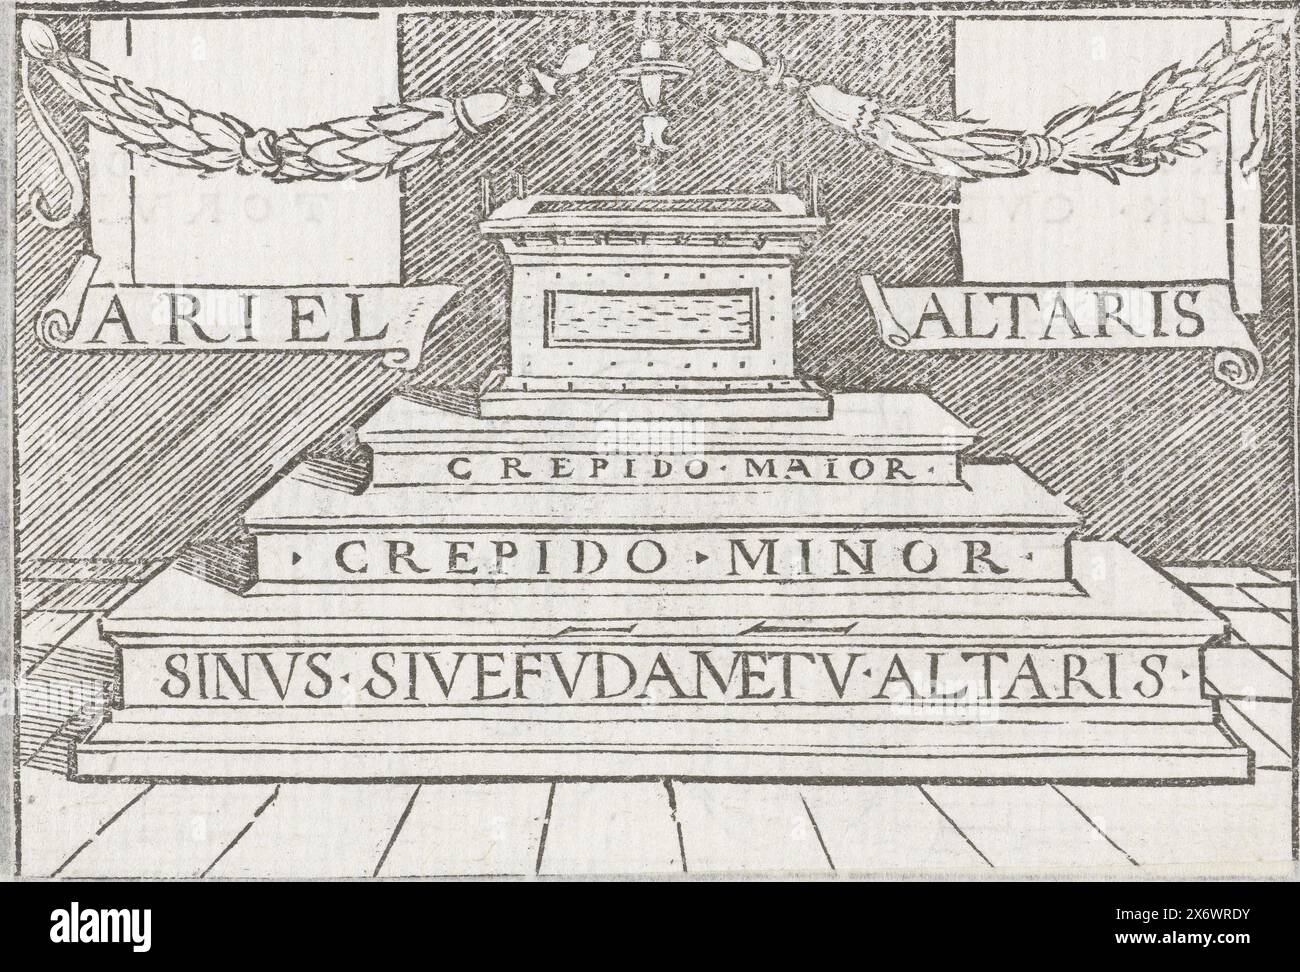 Altar in the new temple in vision of Ezekiel, Altar in the new temple according to the instructions of God as Ezekiel sees it in a vision. There is Latin text on the steps from the stage to the altar. In the margin above the image is the text Ezek. XLIII. Stock Photo